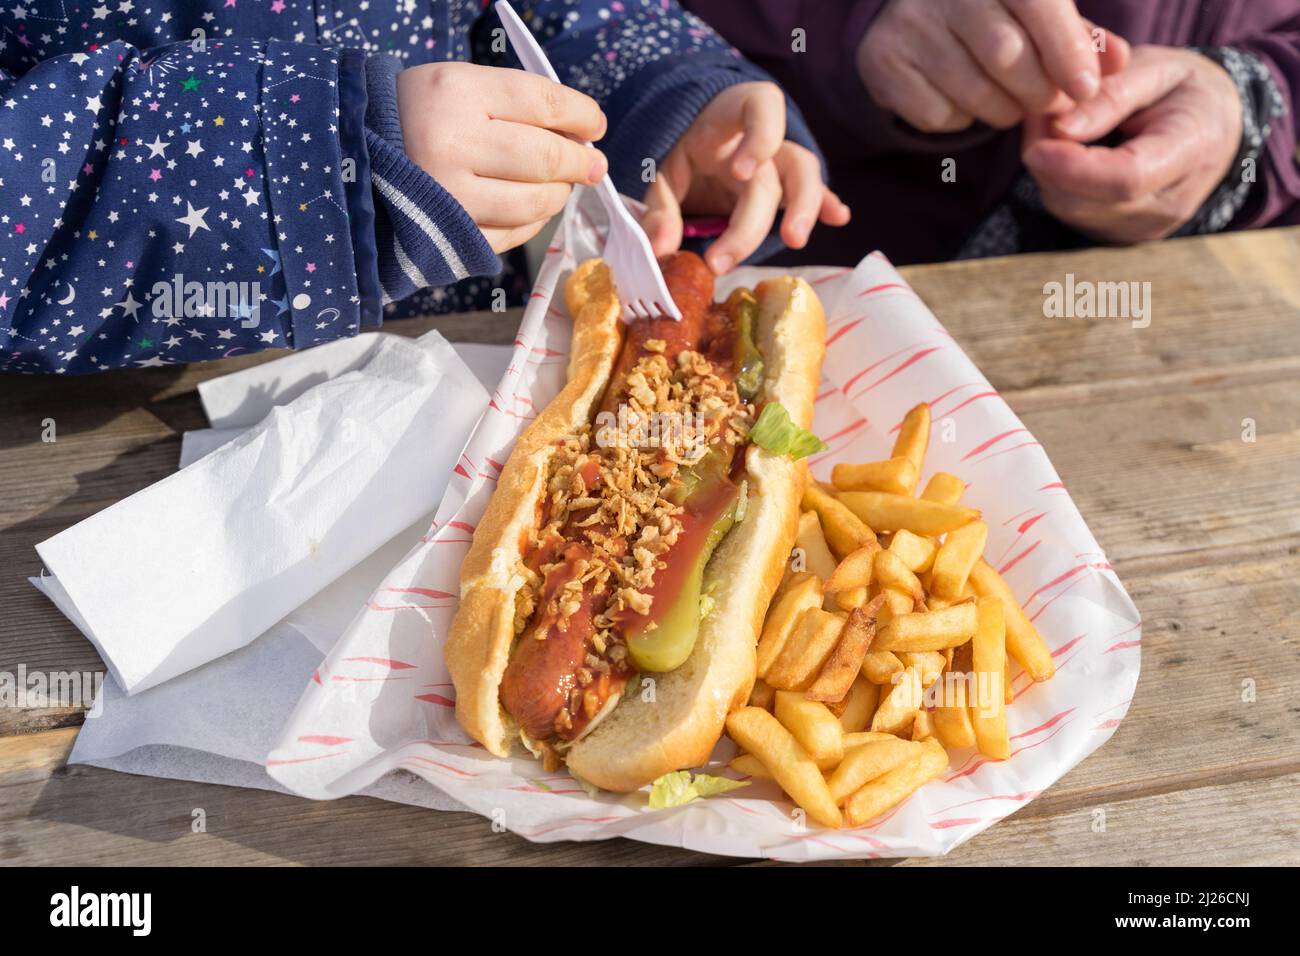 A child eating a hot dog with plate of chips on a day out in Greenwich Southeast London UK Stock Photo